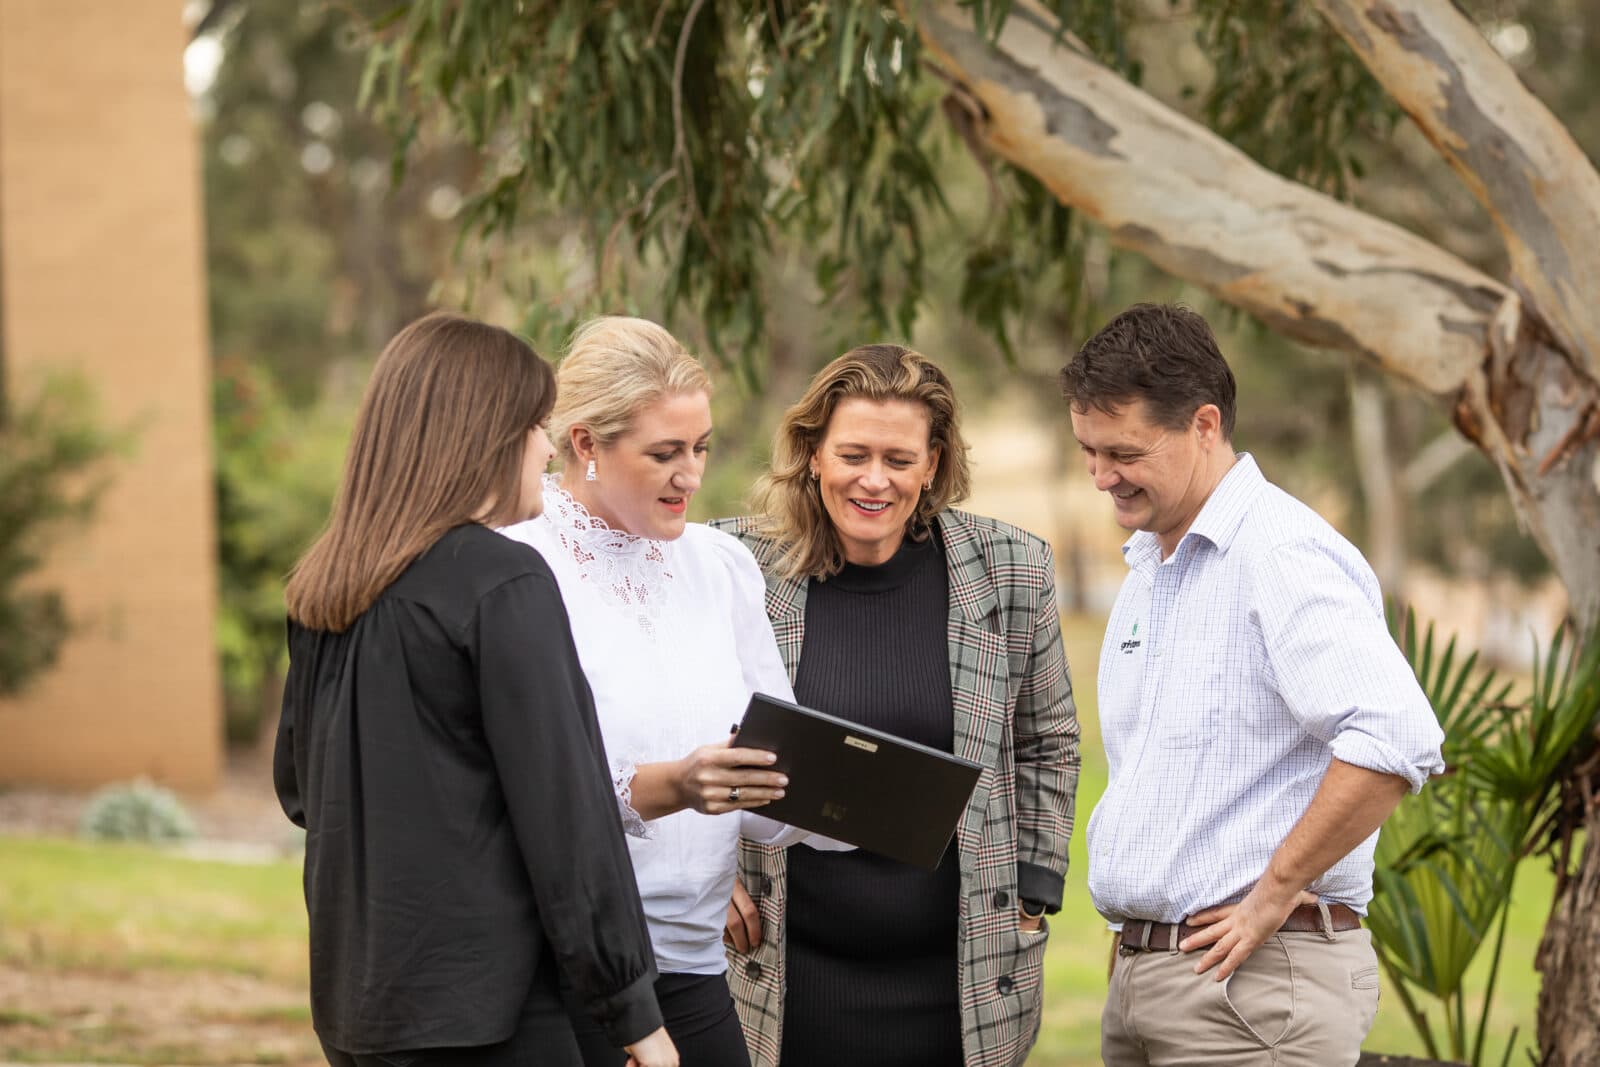 AgriFutures Australia staff engaging in conversation outside office